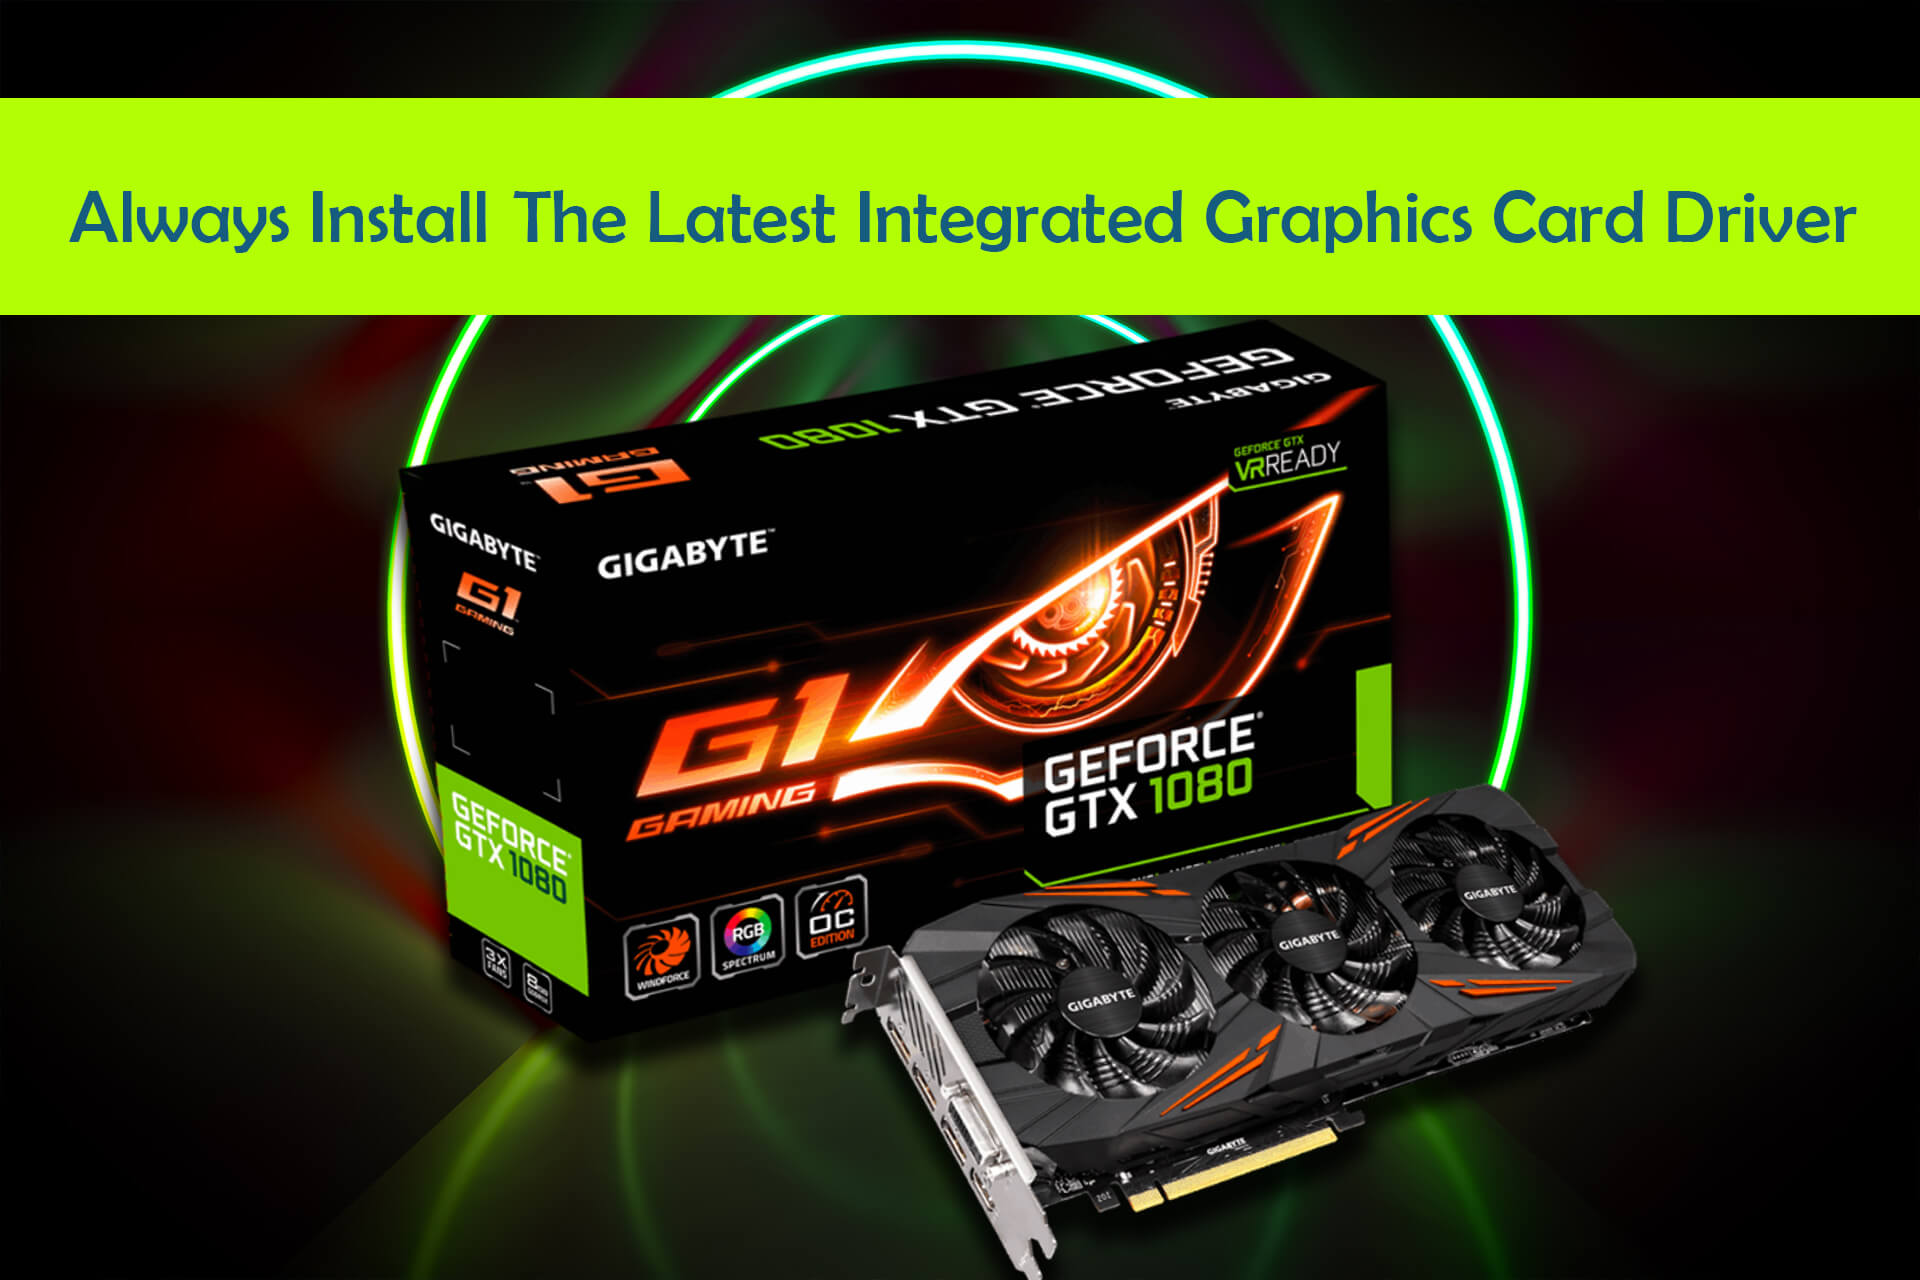 Always install latest integrated graphic card driver